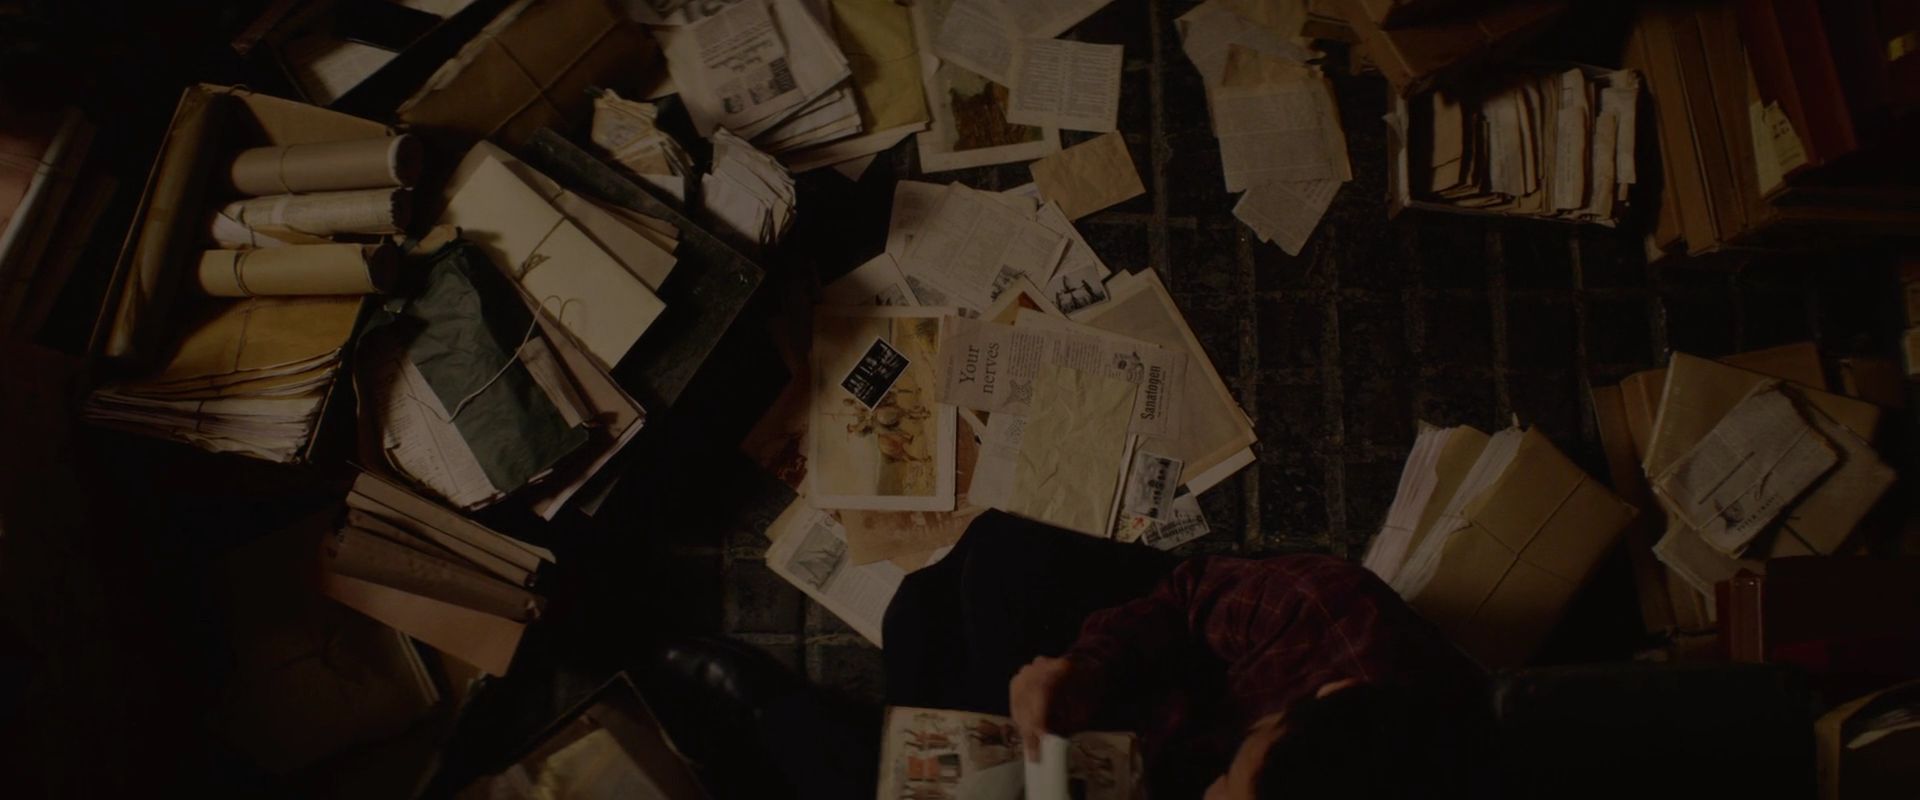 A person sitting on the floor surrounded by papers - Dark academia